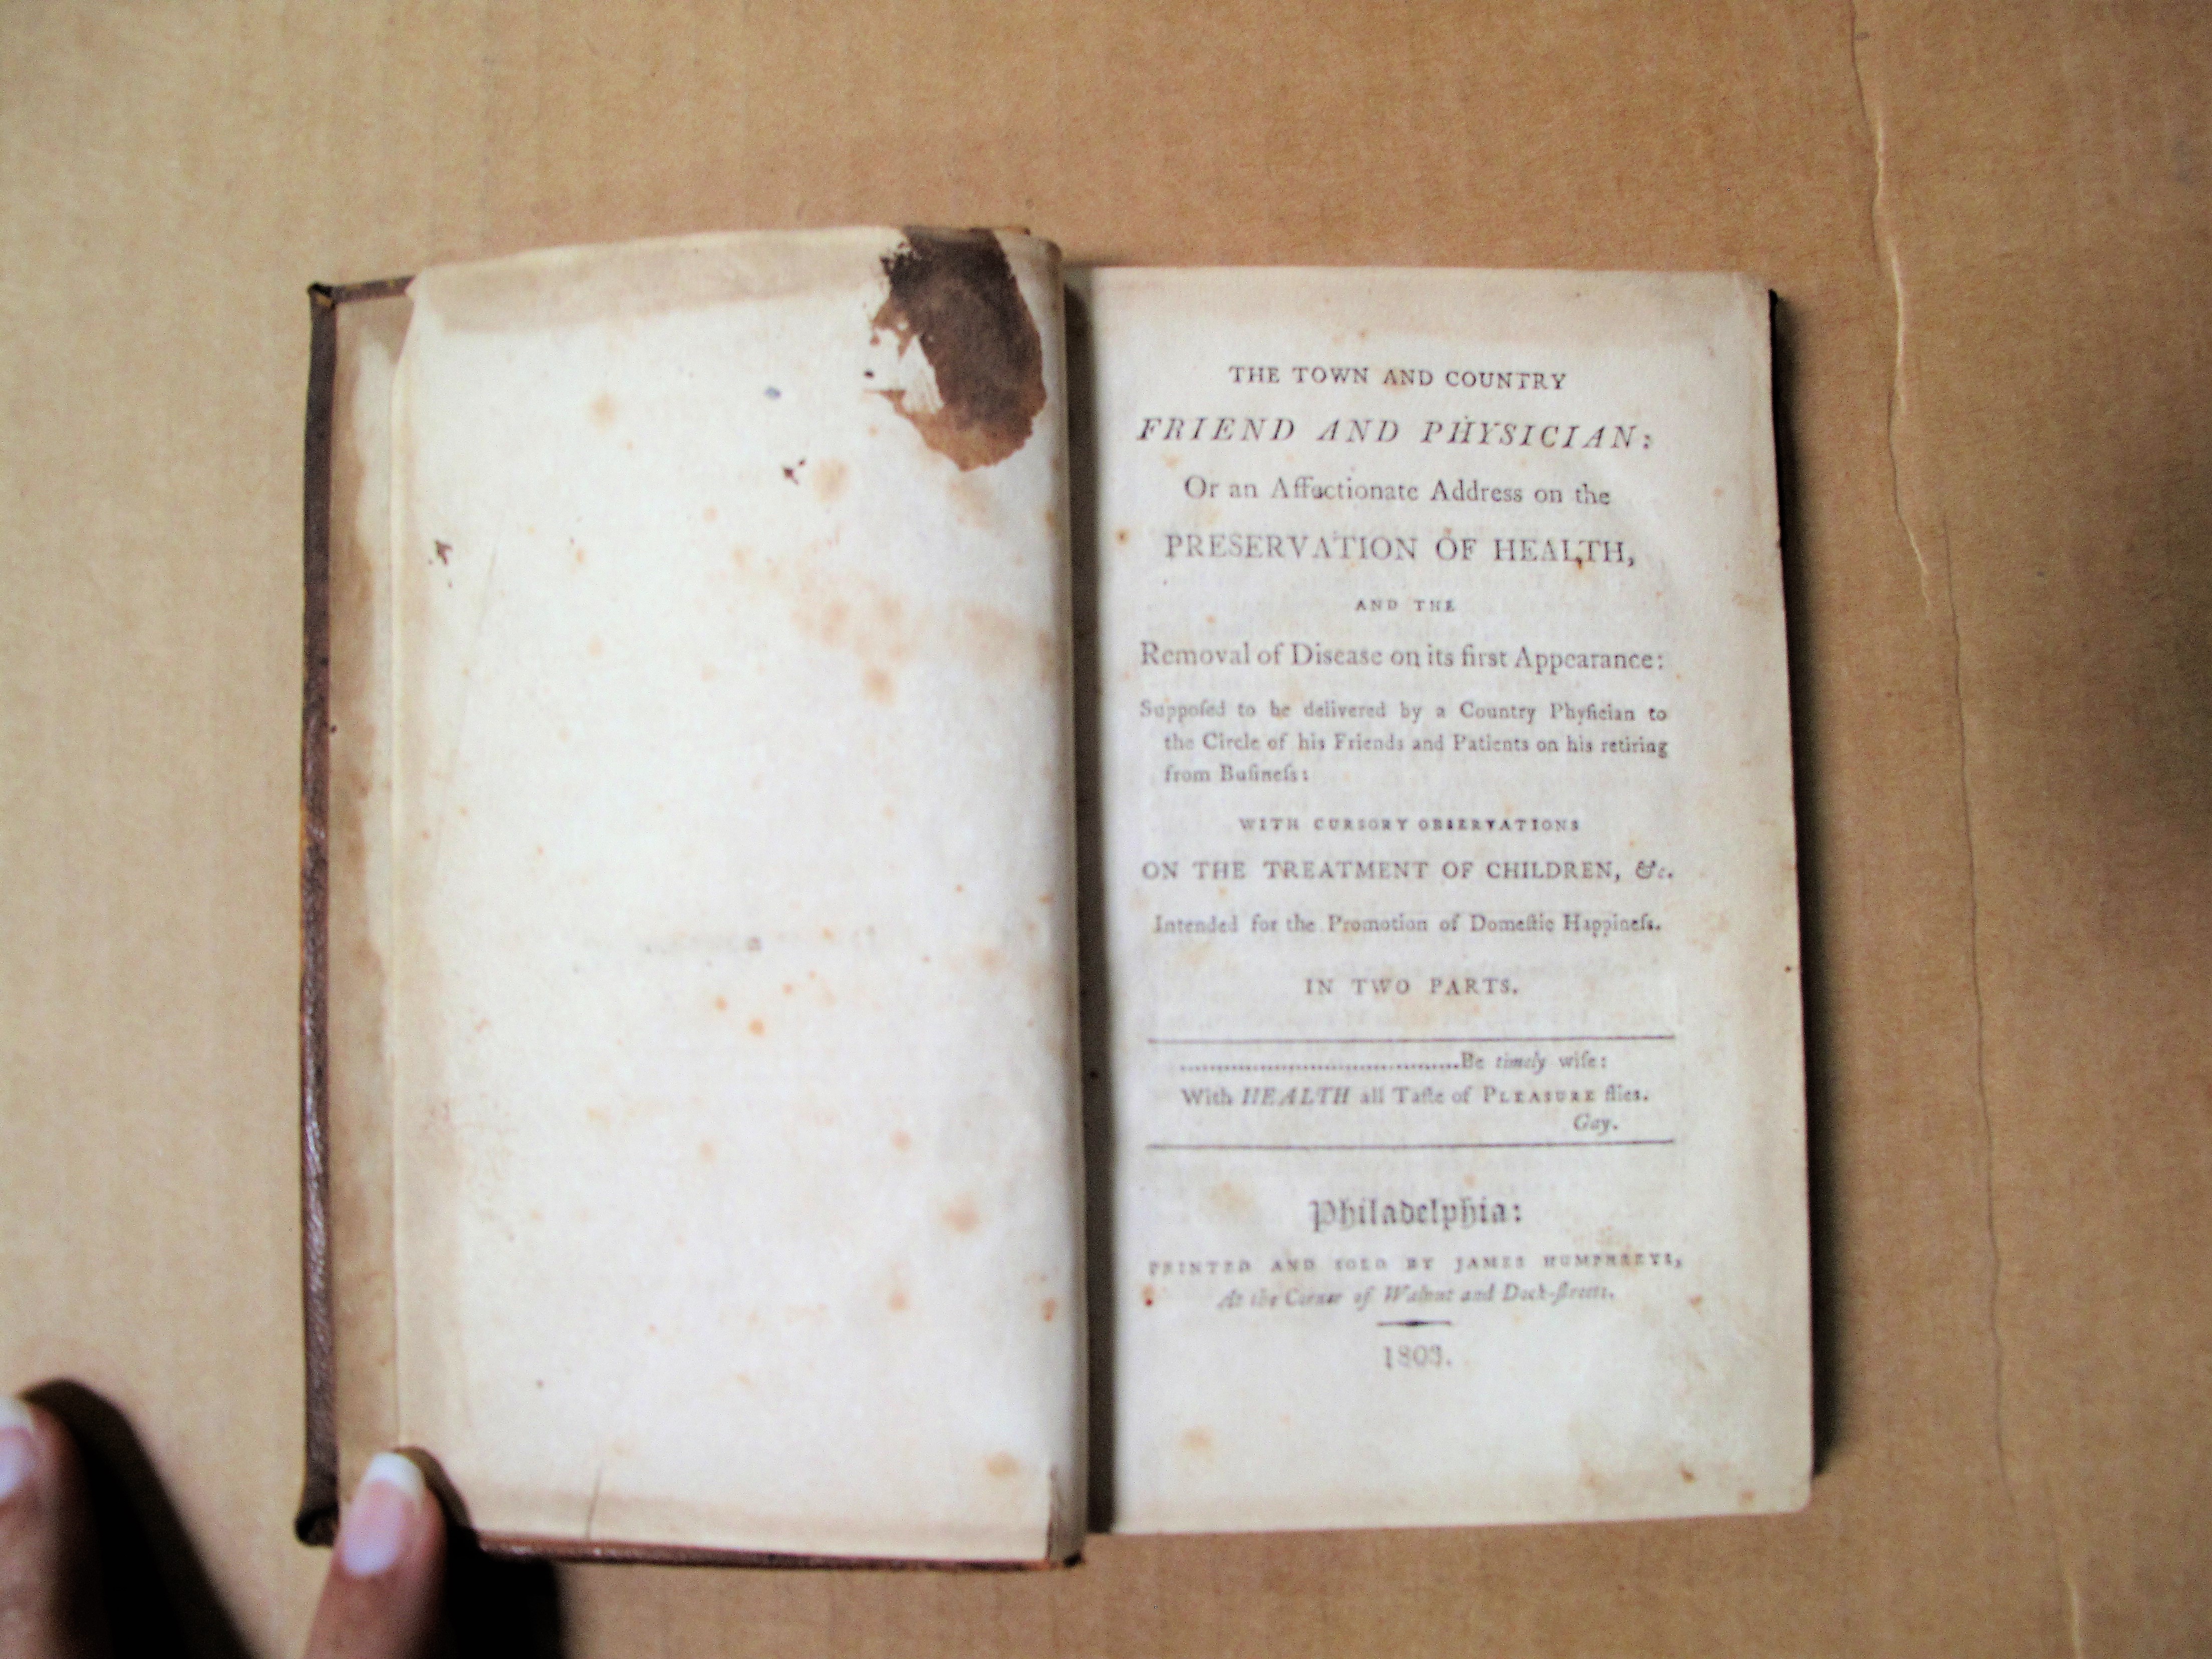 Town and country friend and physician : or, An affectionate address on the preservation of health, and the removal of disease on its first appearance. By James Parkinson-1803. [Mading Collection, McGovern Historical Collection, Texas Medical Center Library]